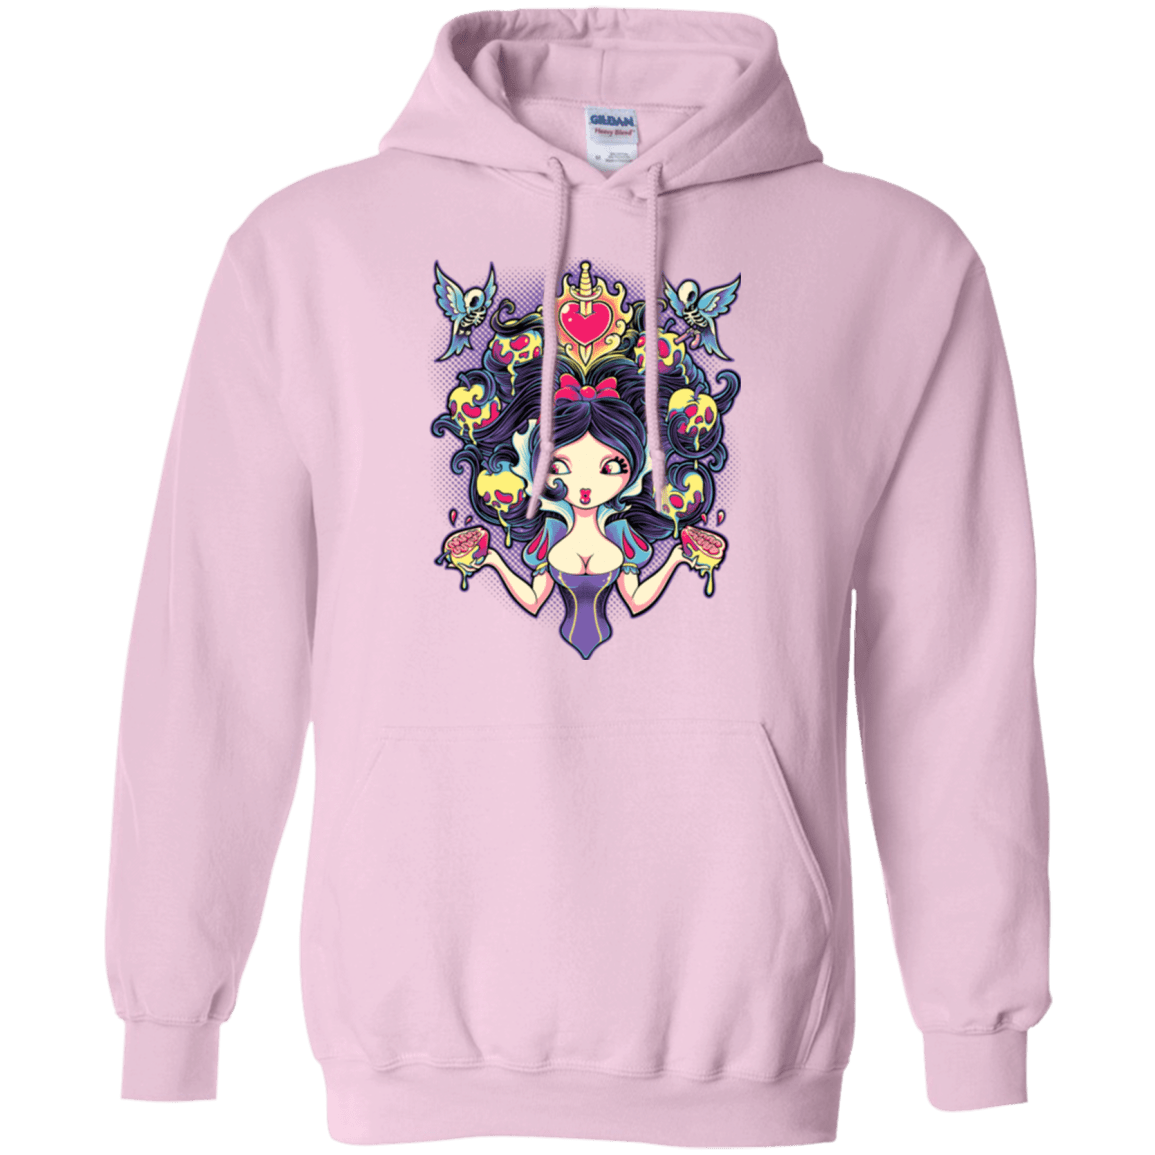 Sweatshirts Light Pink / Small Poisoned Mind Pullover Hoodie